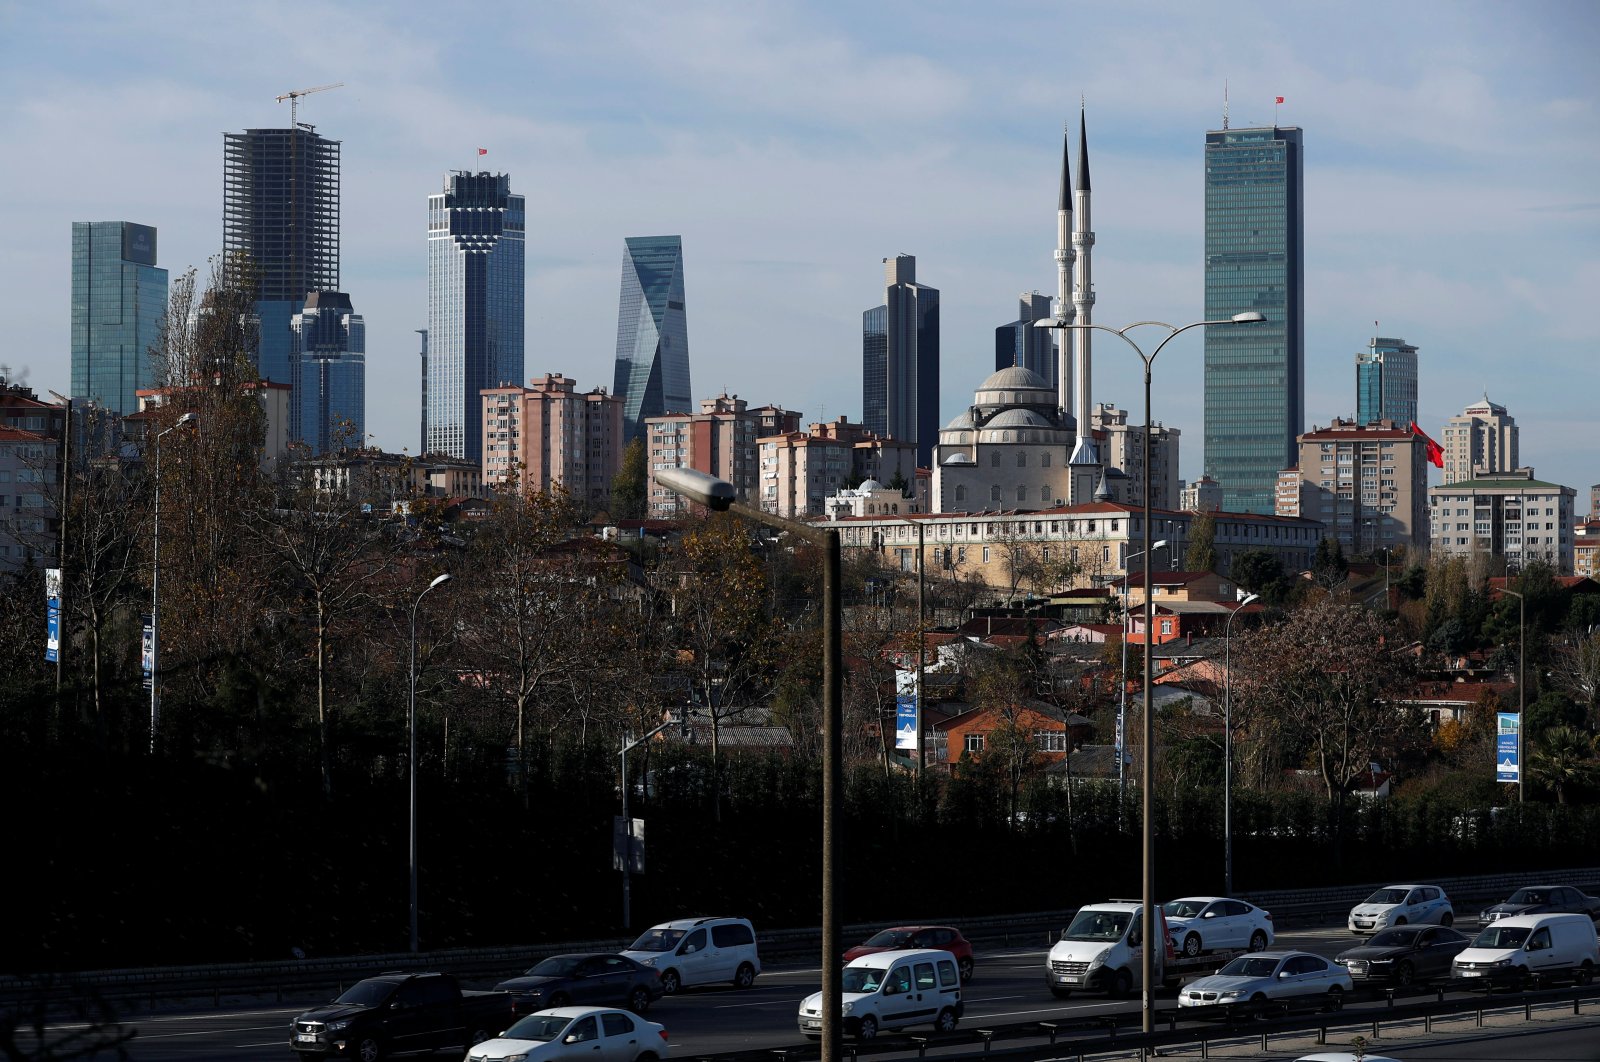 The business and financial district of Levent, which comprises leading Turkish banks&#039; and companies&#039; headquarters, is seen behind a residential neighborhood in Istanbul, Turkey, Nov. 30, 2017. (Reuters Photo)